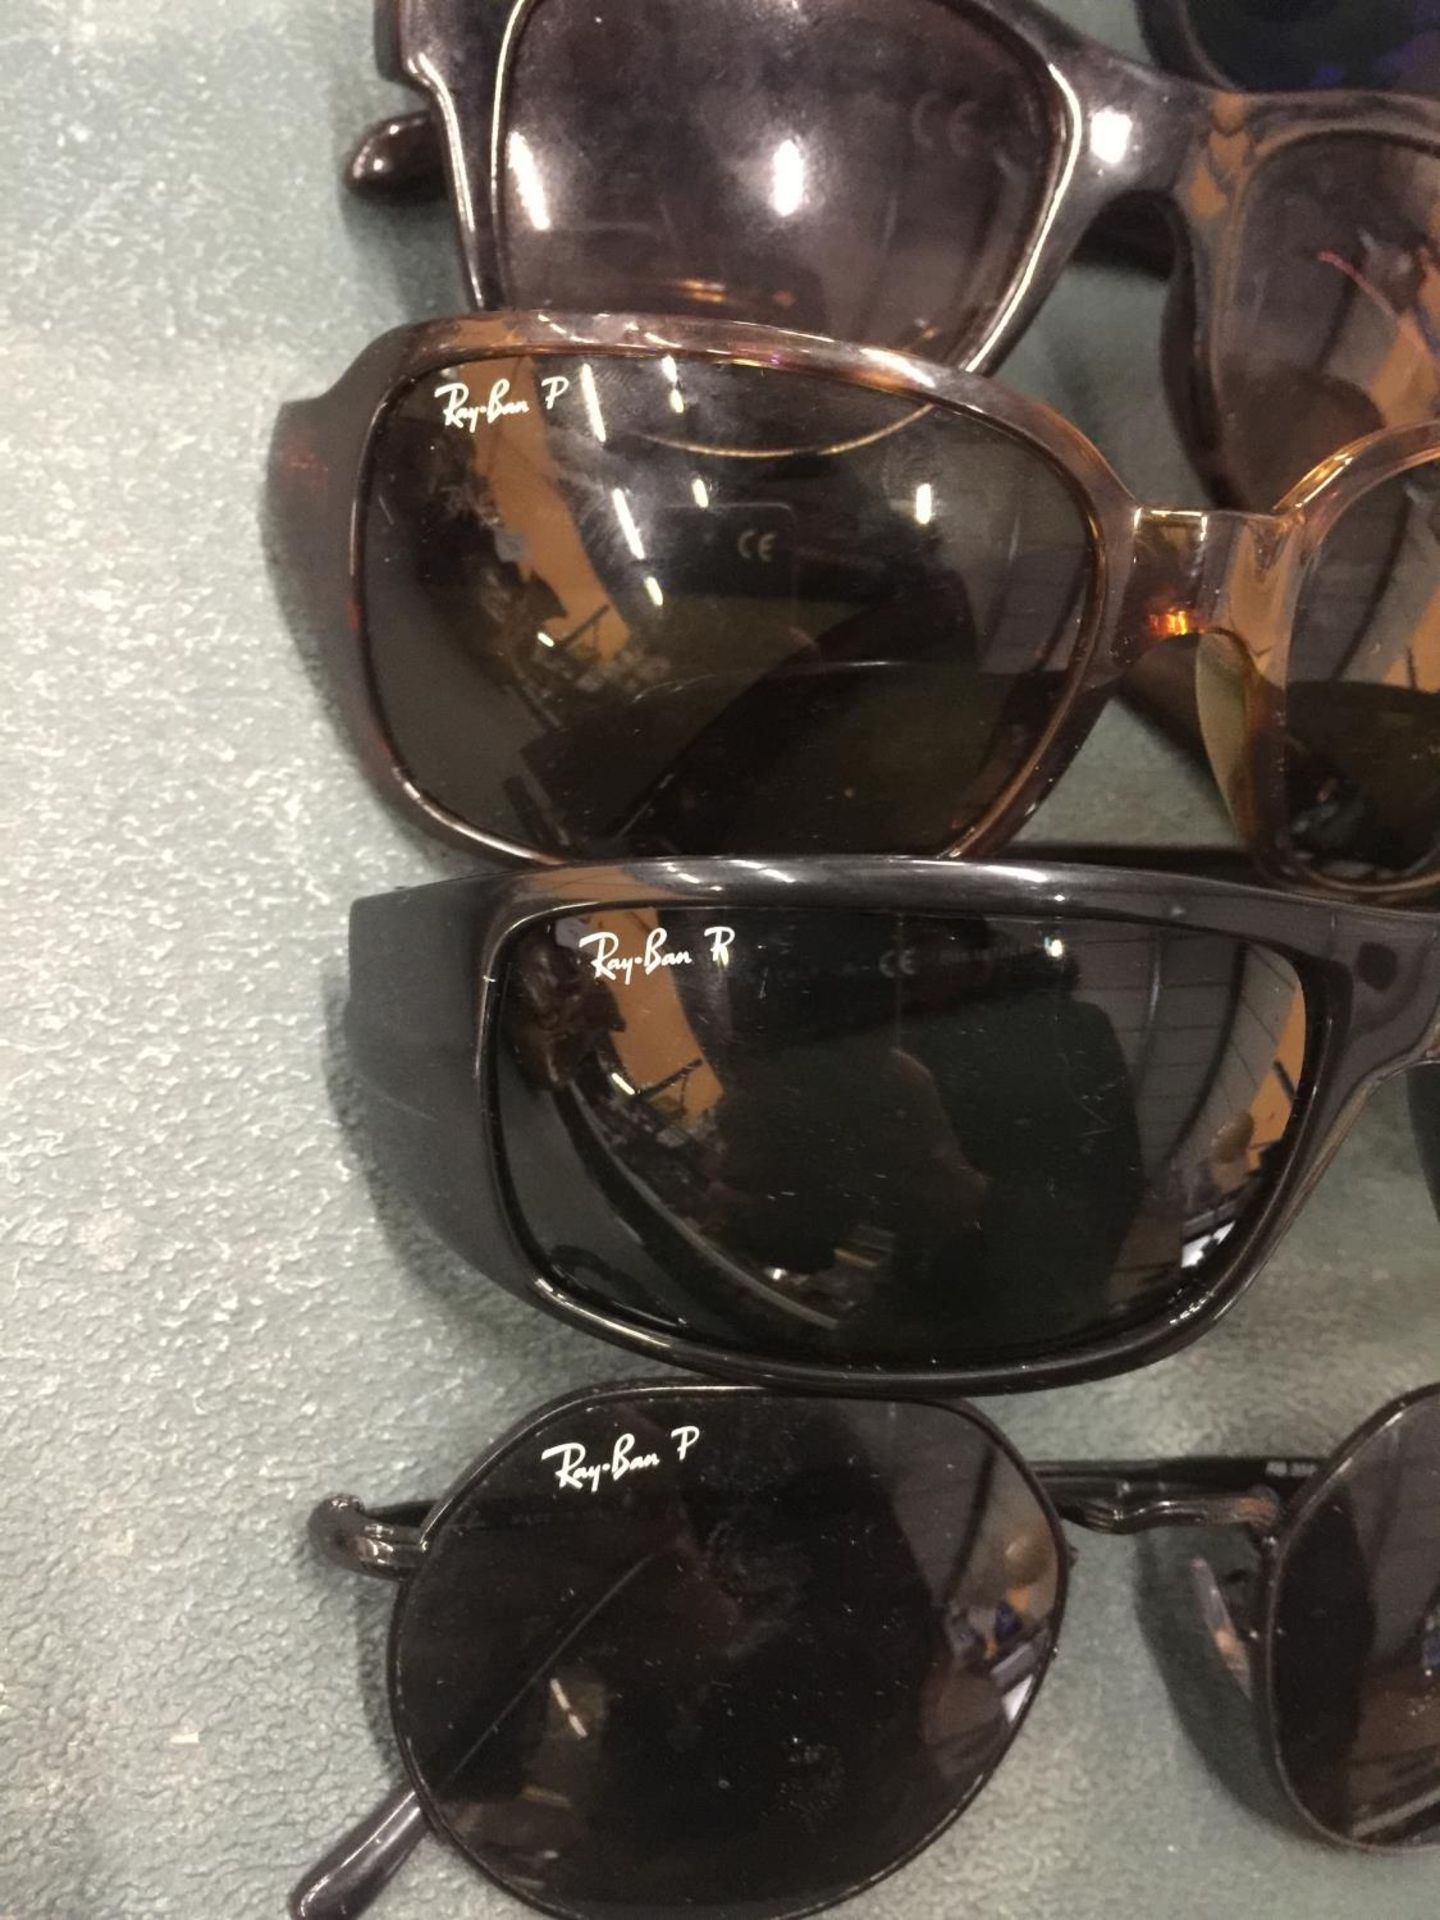 FIVE PAIRS OF VINTAGE SUNGLASSES TO INCLUDE 'RAY-BAN' - Image 2 of 2